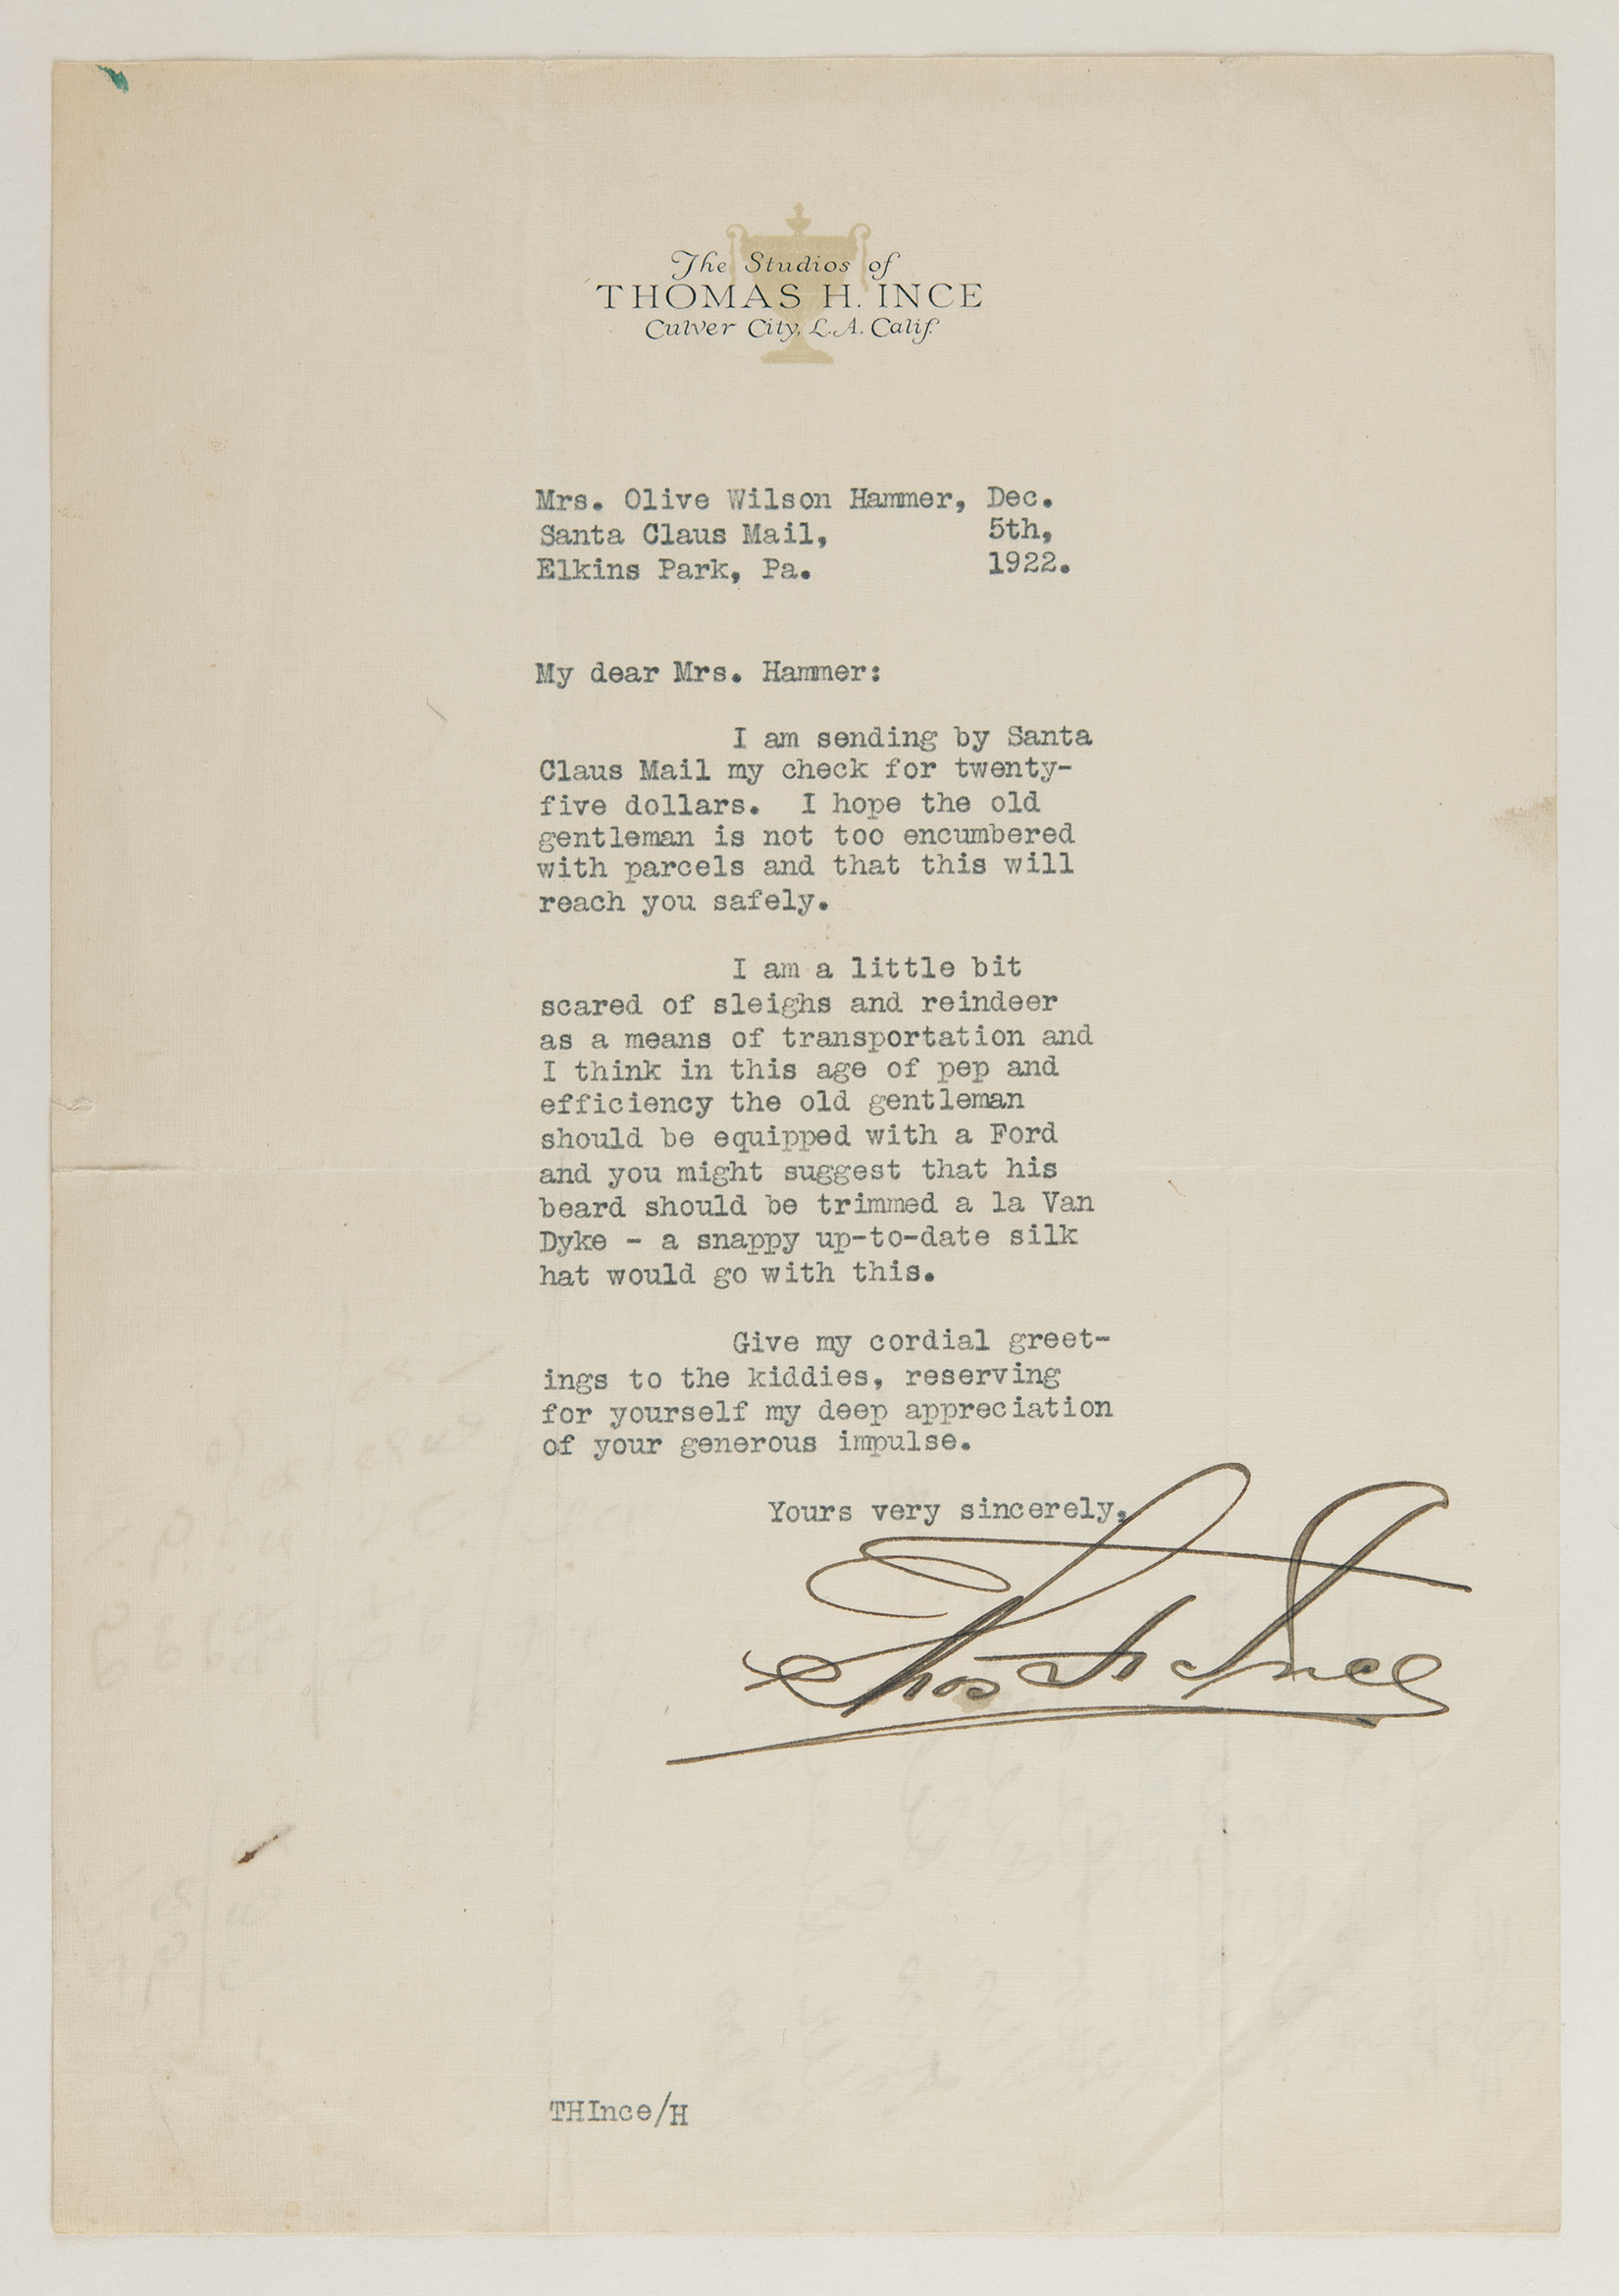 Lot #684 Thomas H. Ince Typed Letter Signed - Image 1